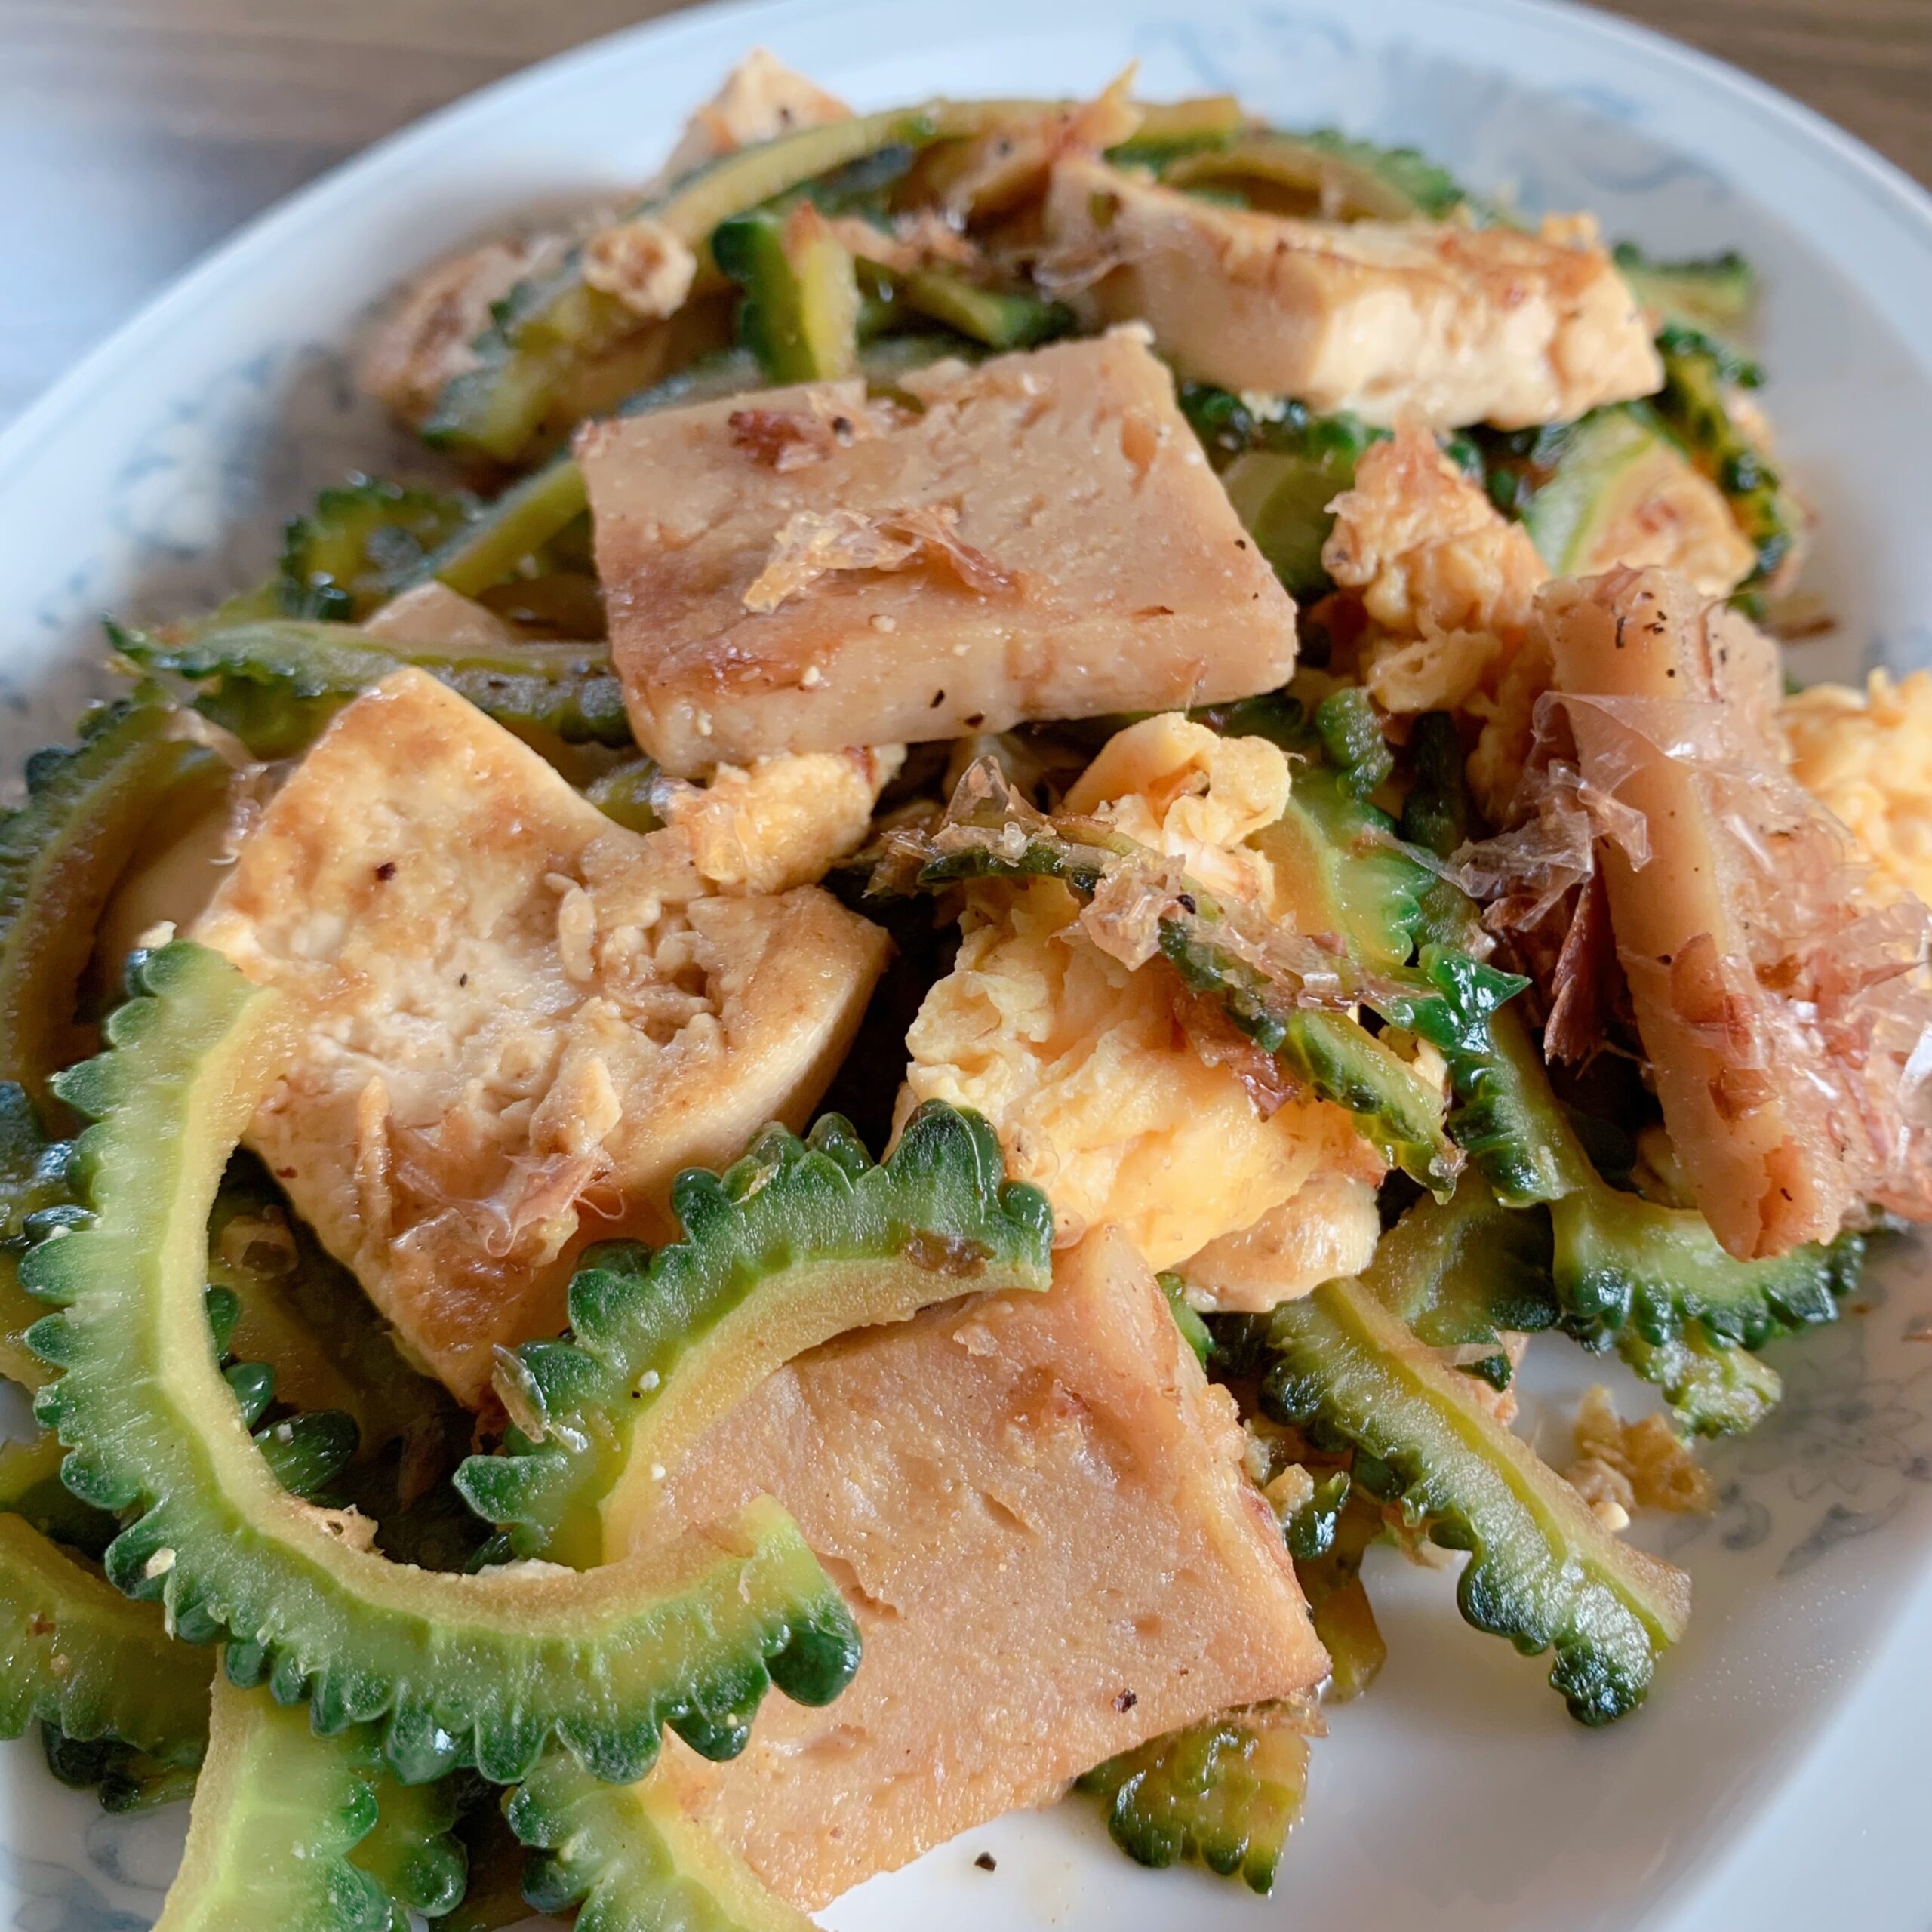 A dish originating in Okinawa that uses goya, tofu, spam, and eggs. 